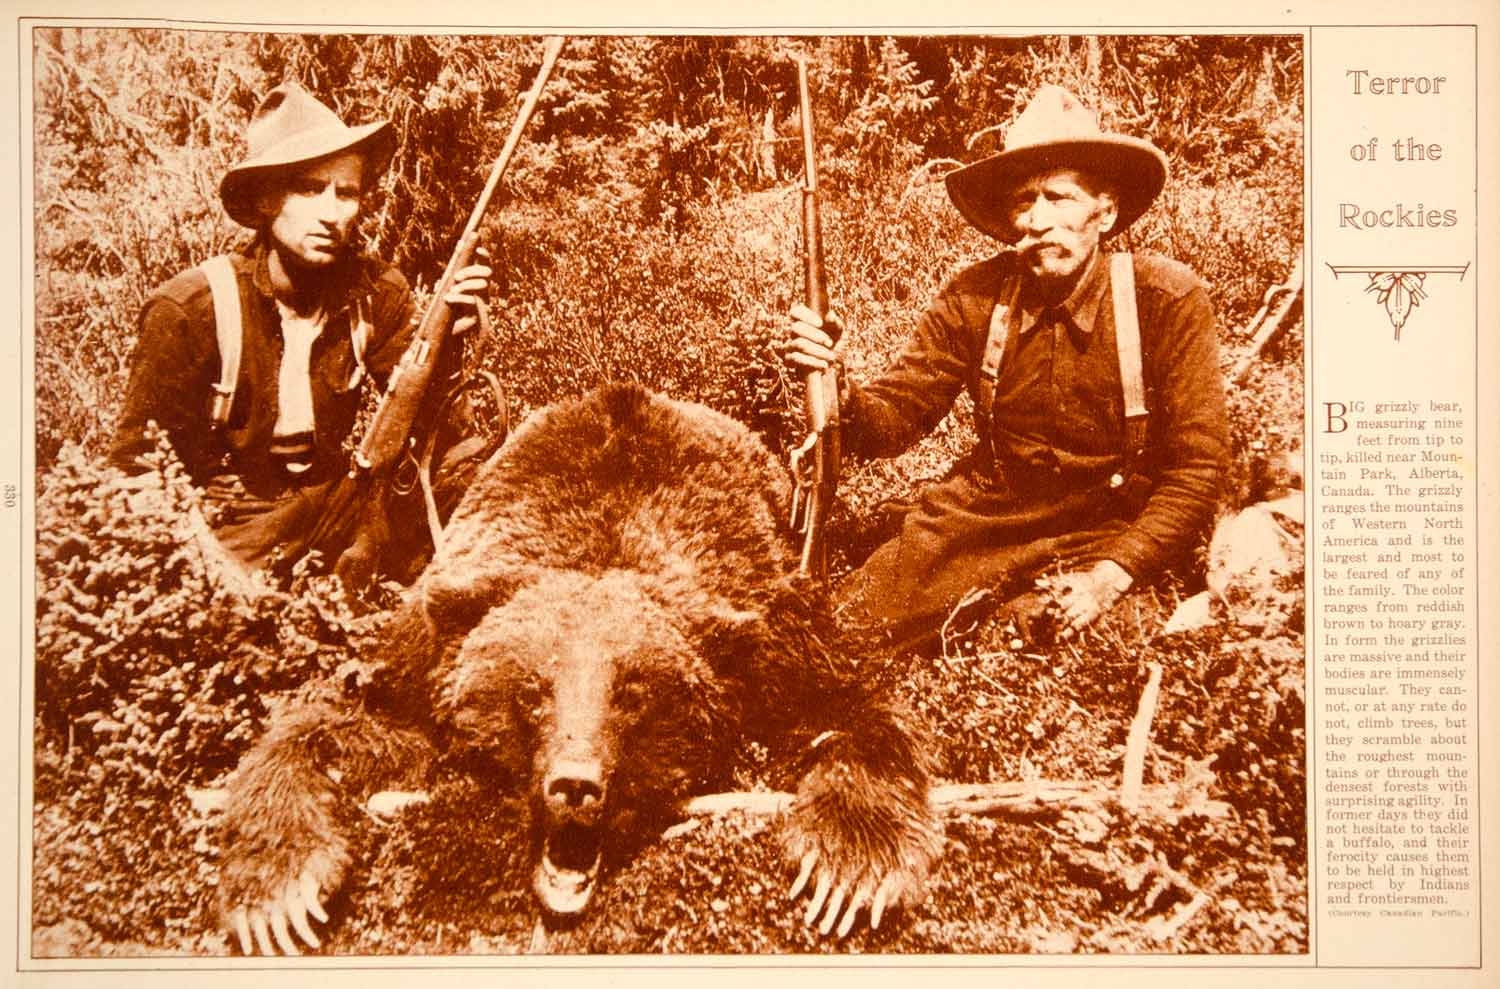 1923 Rotogravure Dead Grizzly Bear Hunters Guns Rocky Mountains Canada Wildlife